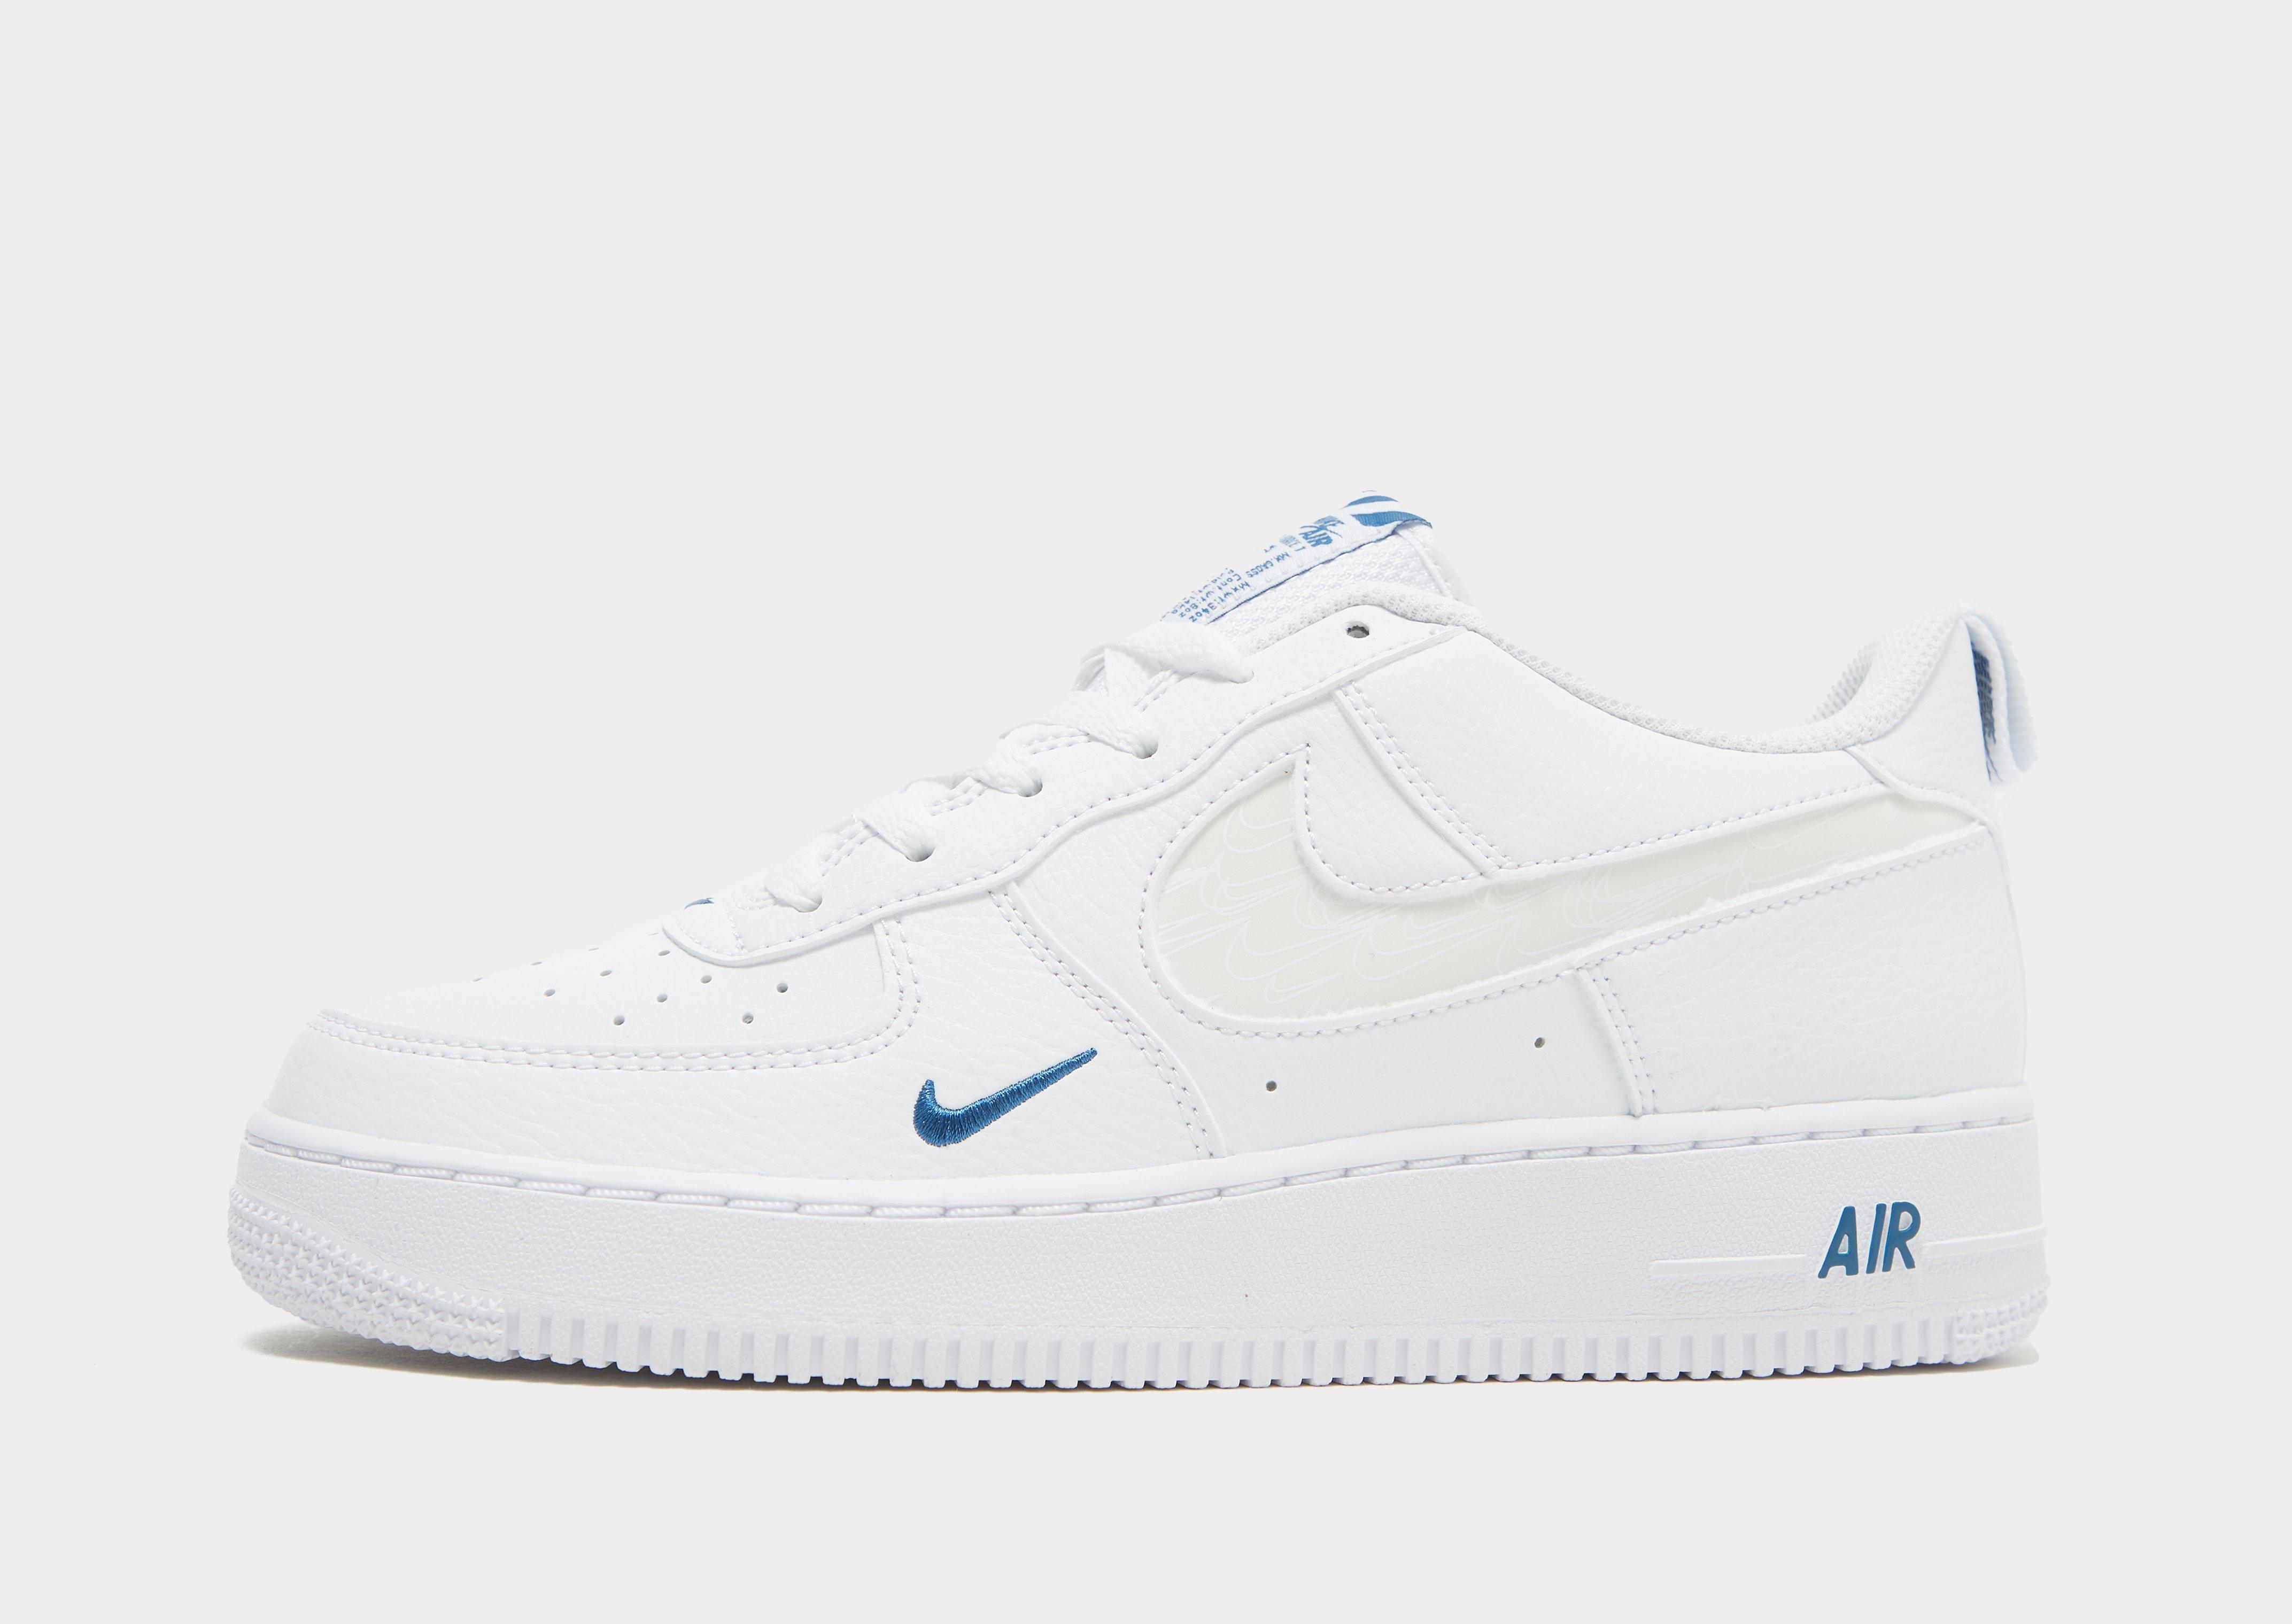 white & blue air force 1 lv8 3 trainers